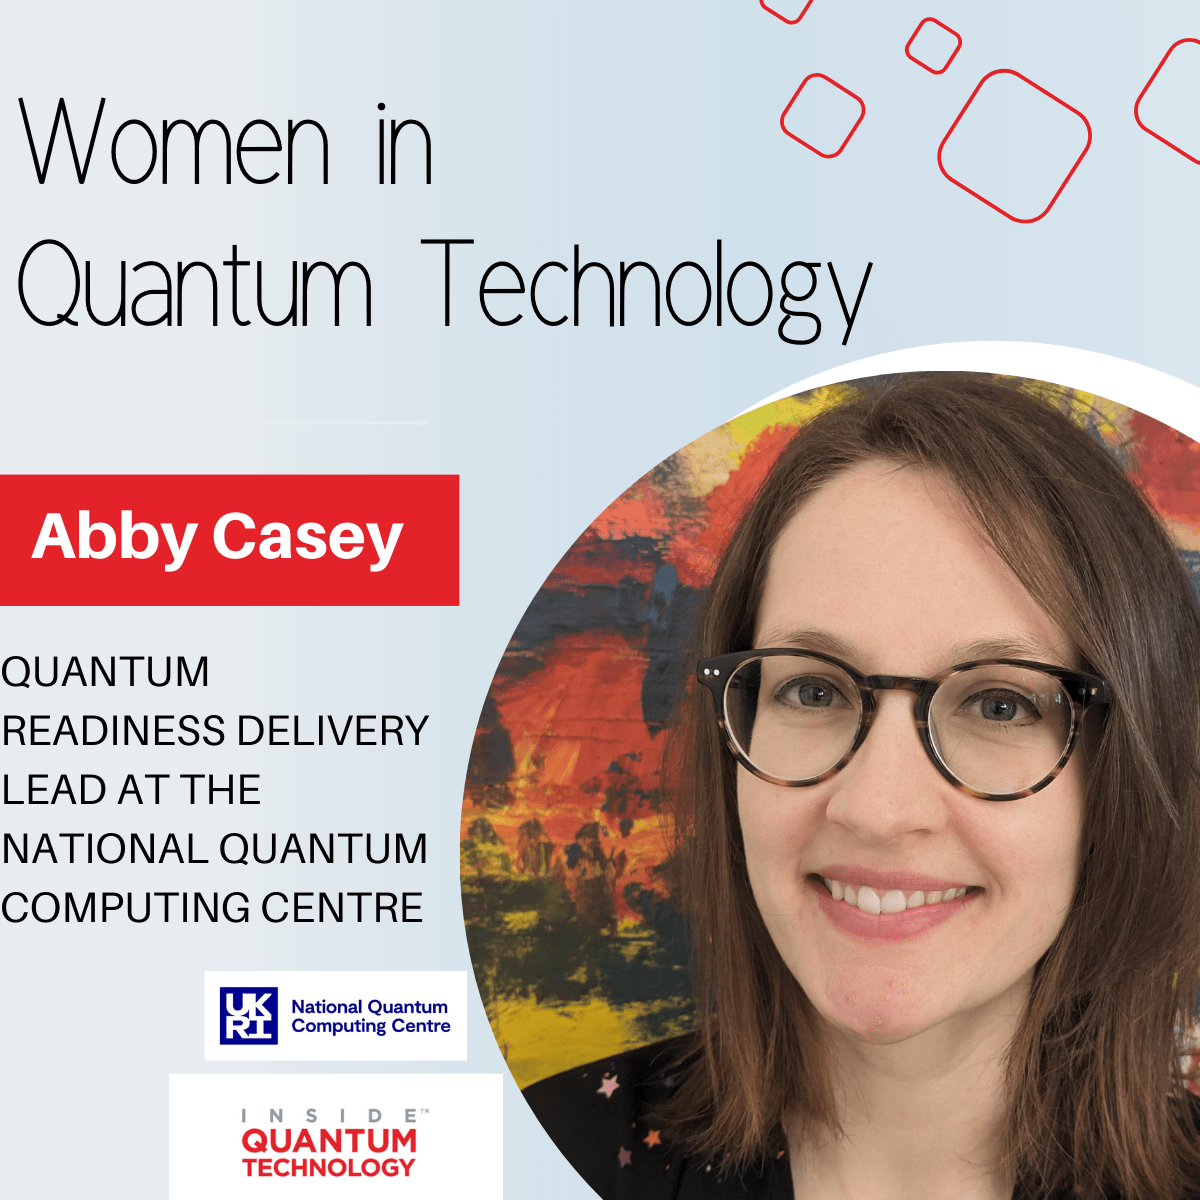 Abby Casey, a Quantum Readiness Delivery Lead at the National Quantum Computing Center (NQCC), tells her story about entering the quantum ecosystem.